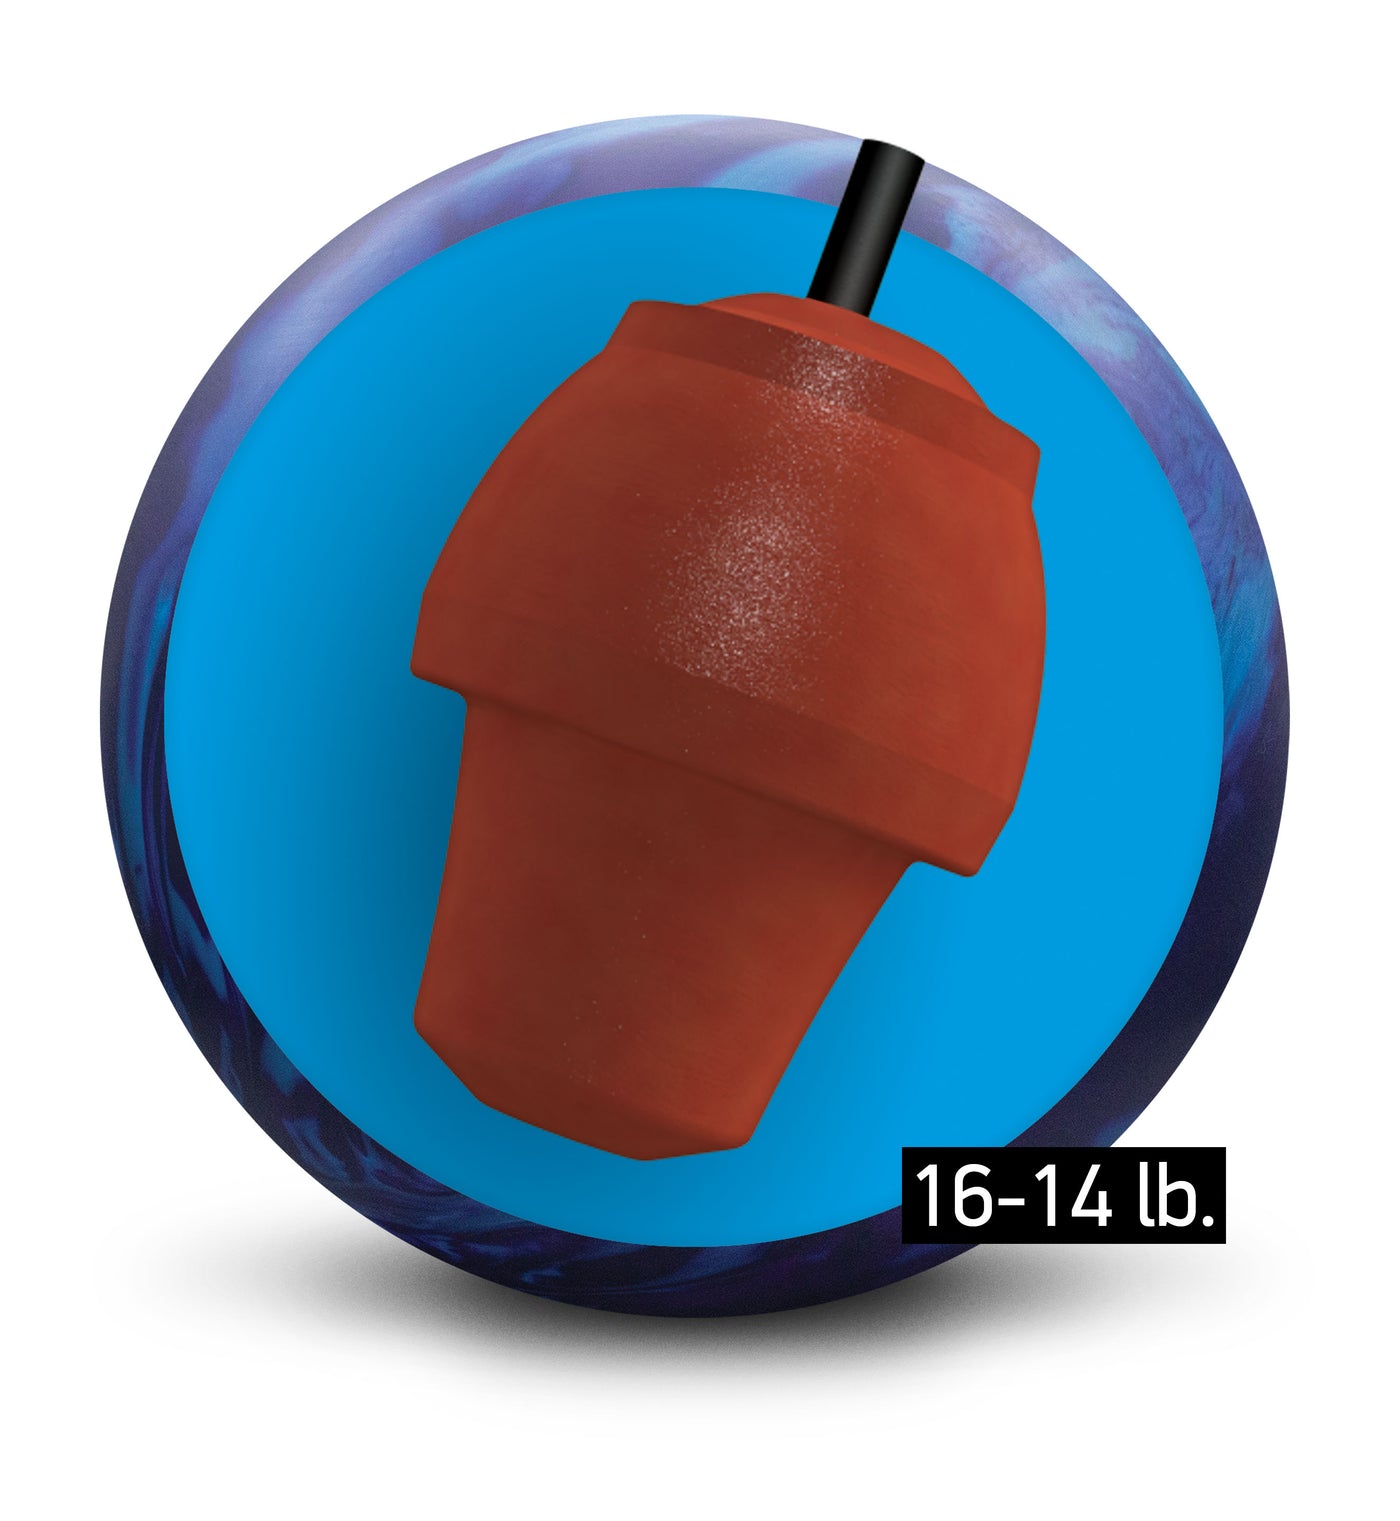 Outlook Bowling Ball Core for 16-14 pound balls